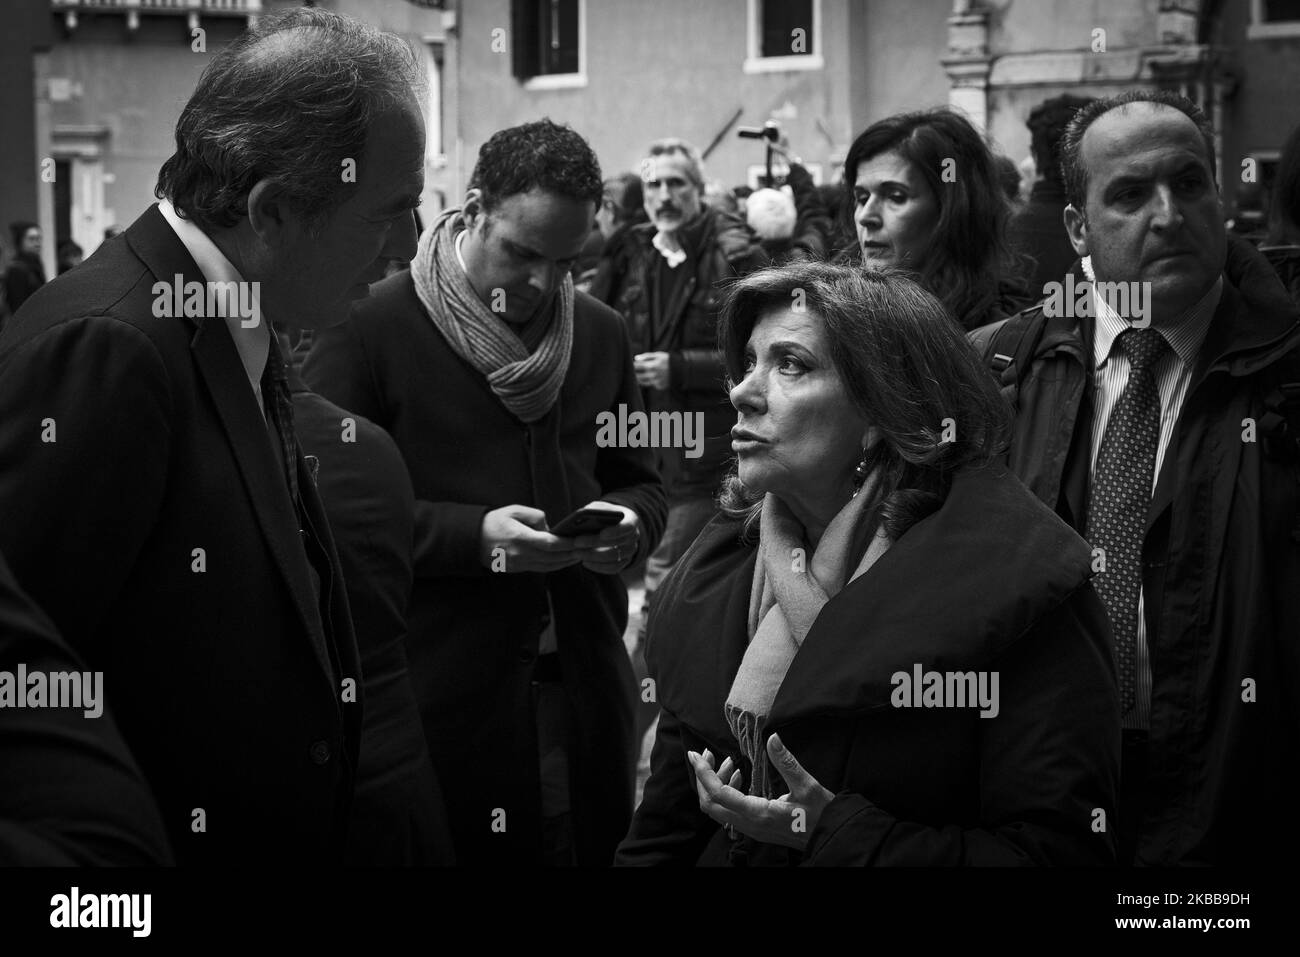 (EDITOR'S NOTE: Image was converted to black and white) The President of the Senate of the Republic Maria Elisabetta Alberti Casellati visits Venice after the flood, Venice, Italy, November 16, 2019 (Photo by Roberto Silvino/NurPhoto) Stock Photo